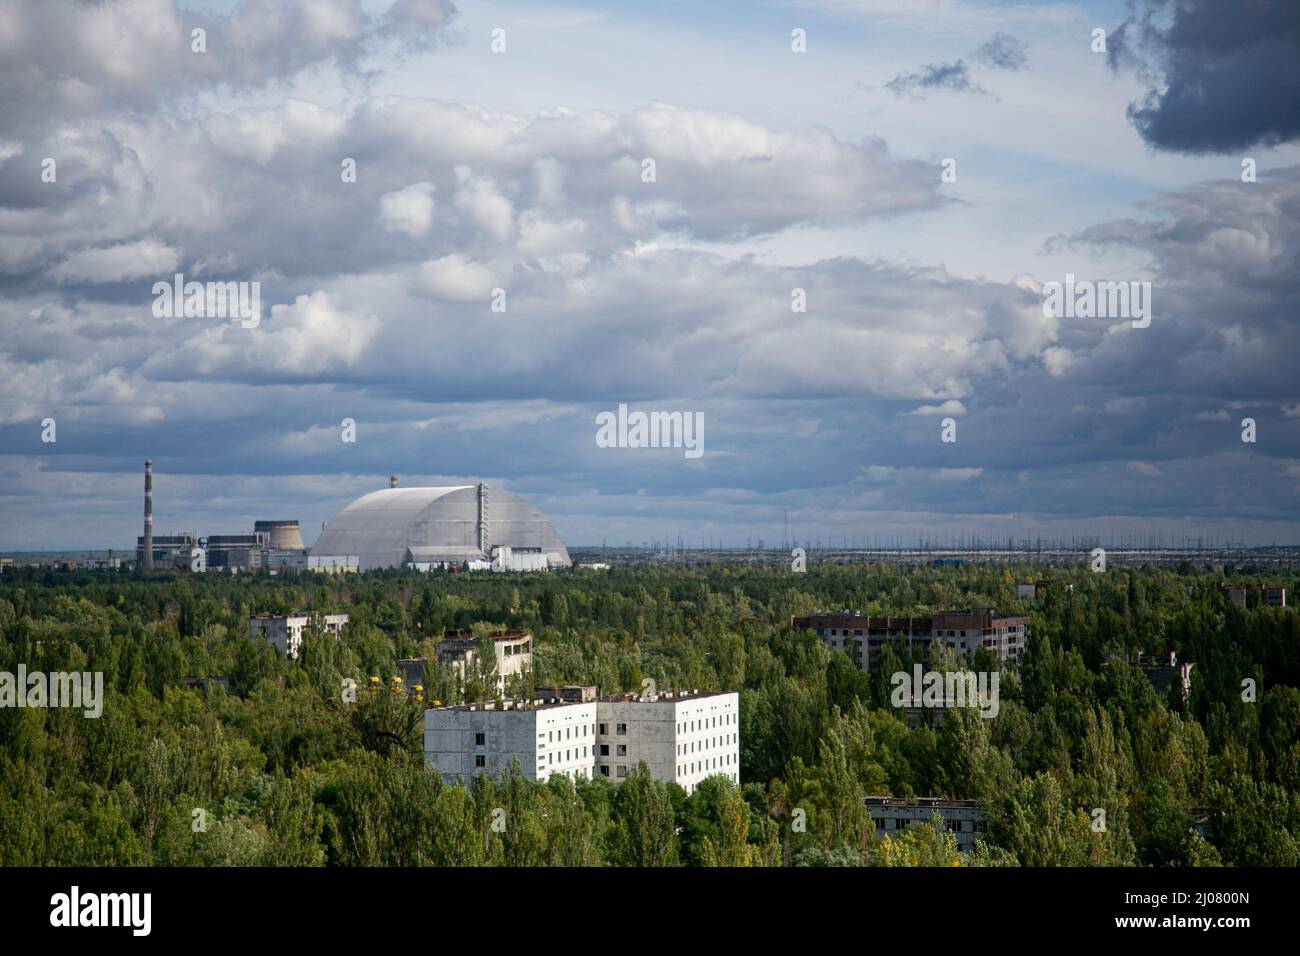 A distance view of the arch-shaped New Safe Confinement structure installed in 2016 to contain the remains of Chernobyl's number 4 reactor unit which was destroyed during the historical Chernobyl nuclear disaster in 1986 due to the meltdown and explosion of the nuclear reactor. The situation of the Chernobyl nuclear plant remains at high risk according to the Ukrainian government since the Russian Force captured the area. The Russian Force repeatedly halt the energy supply to the nuclear plant which was used to cool down the core of the destroyed number 4 nuclear plant. However, the Internatio Stock Photo